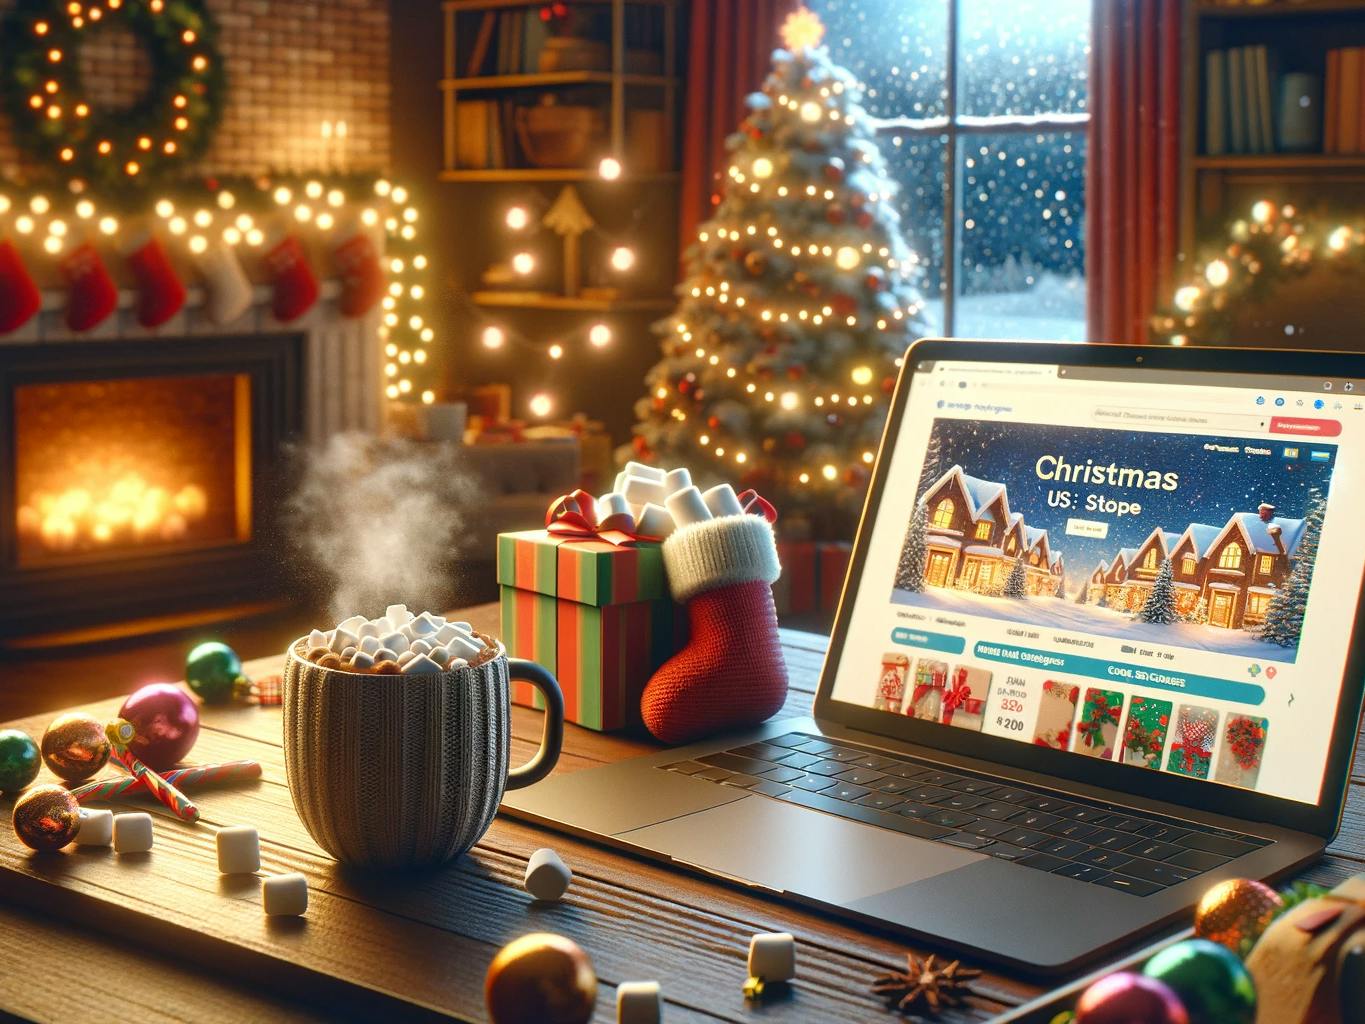 depicting online shopping for Christmas from US-based stores in a realistic home office setting